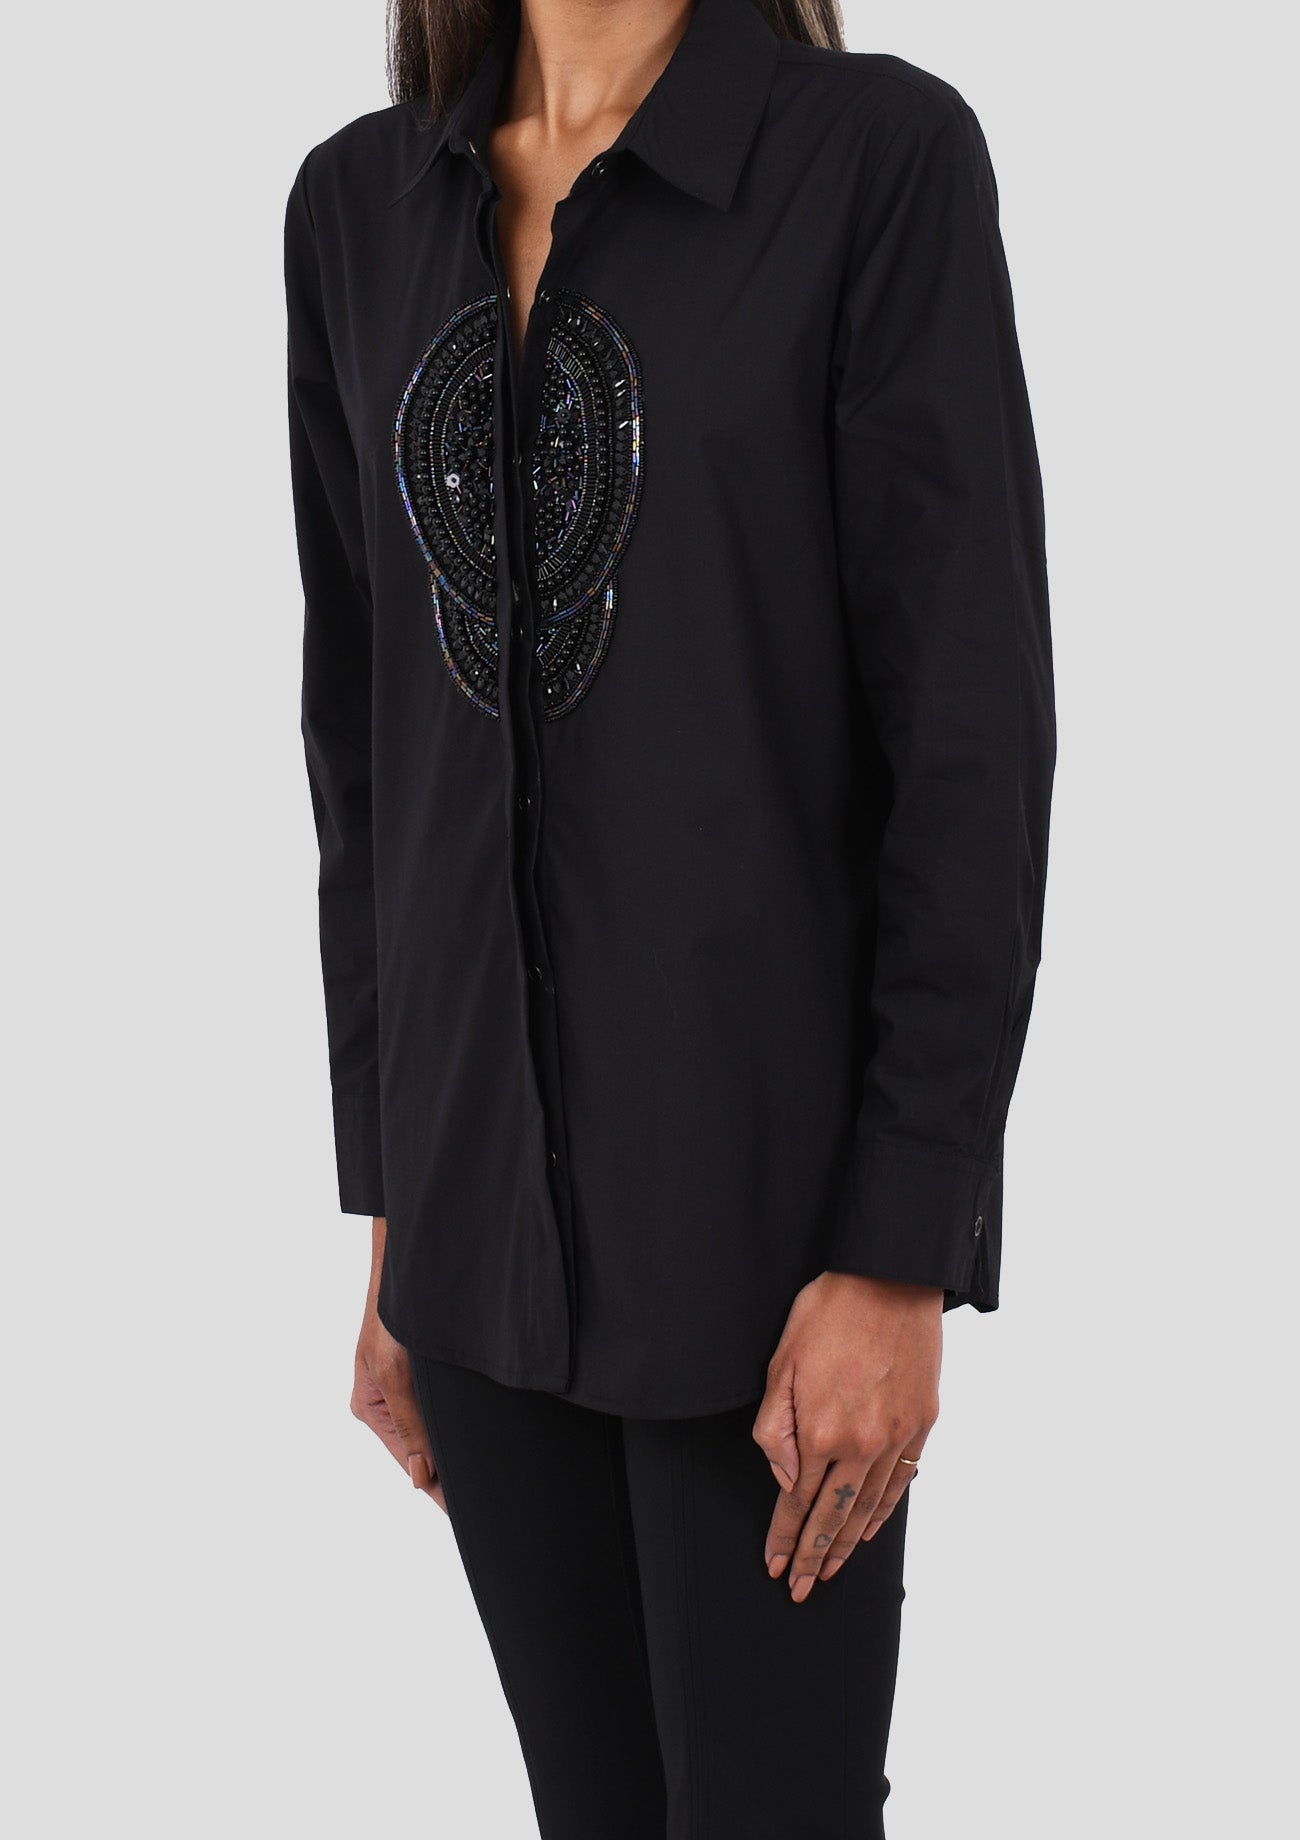 Black Cotton Shirt With Black Embroidery